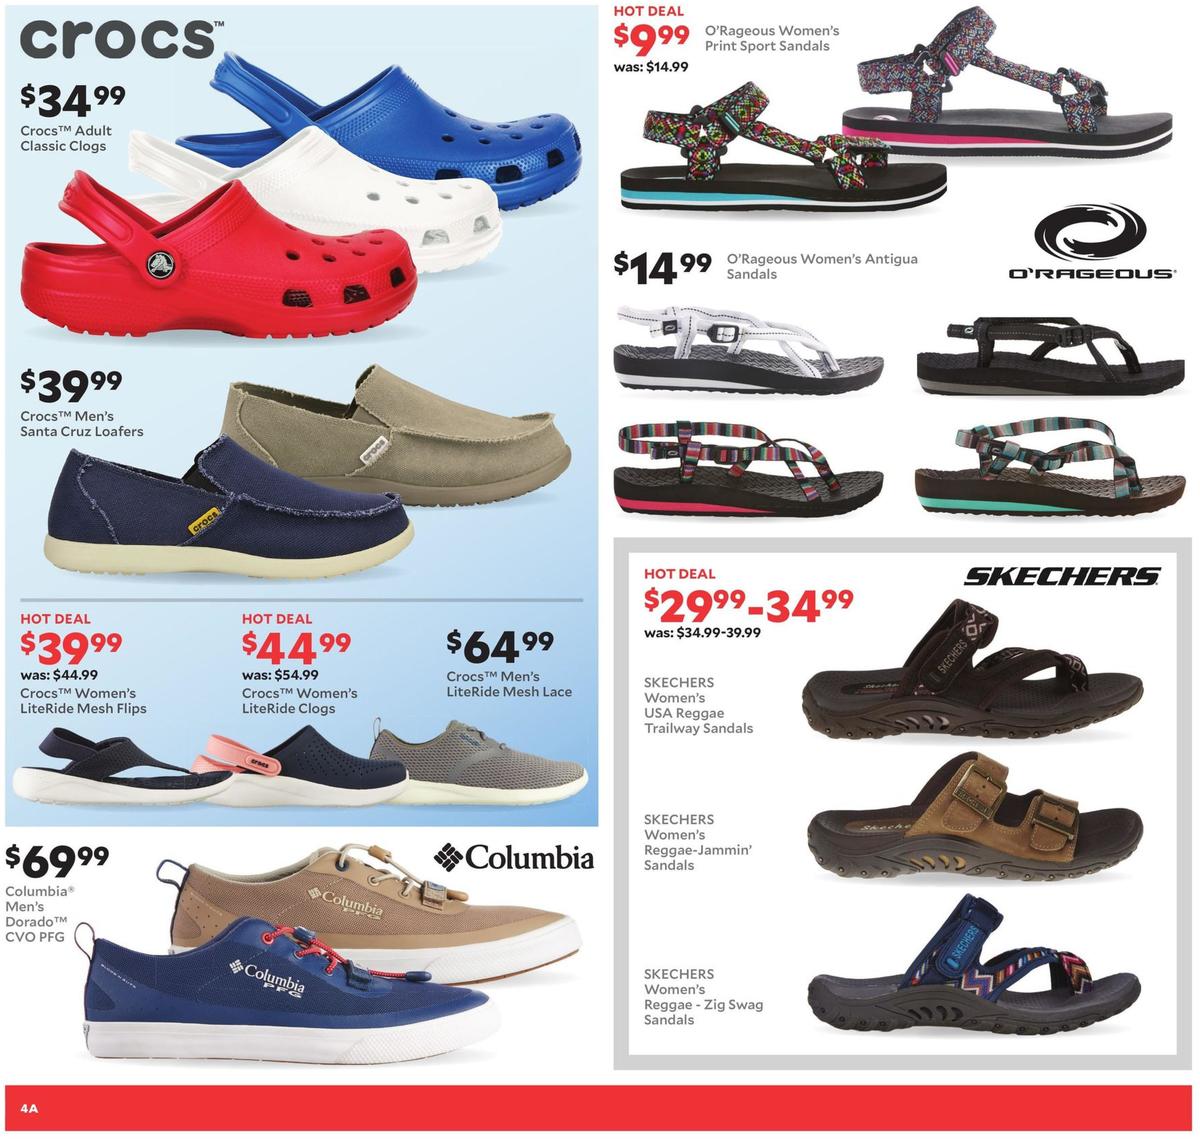 Academy Sports + Outdoors Weekly Ad from June 23